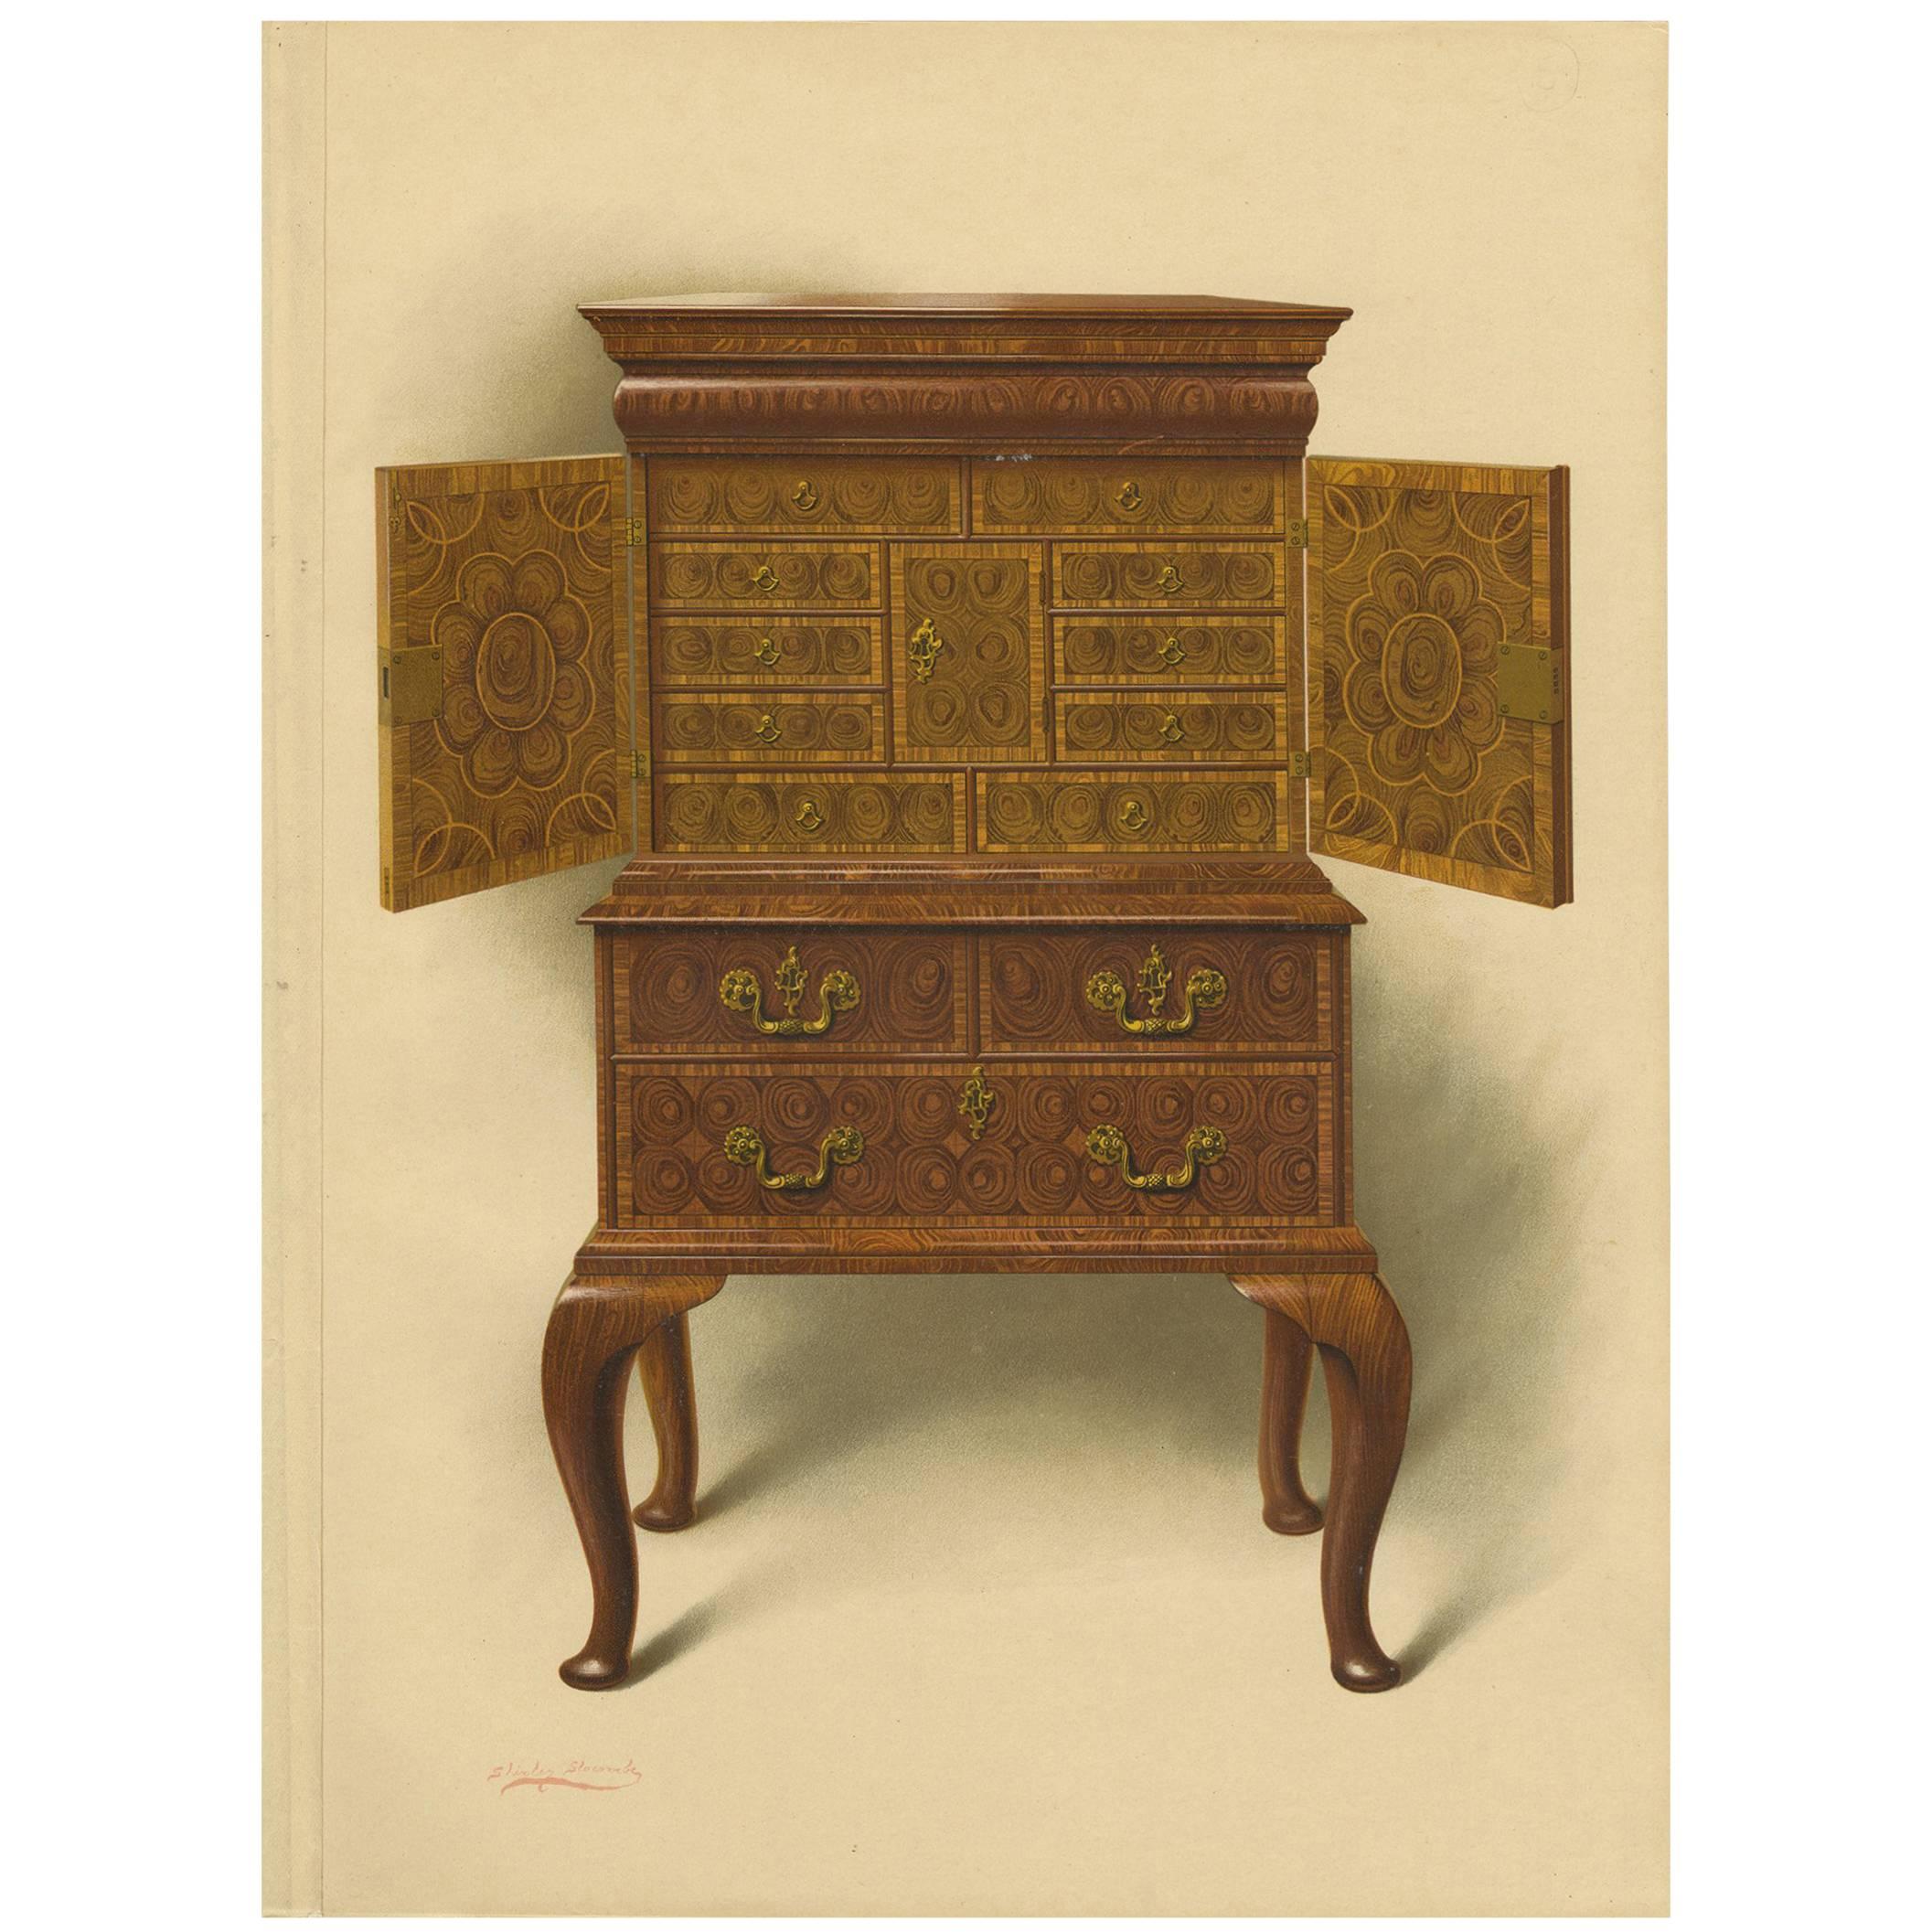 Antique Print of English Furniture ‘Walnut Cabinet E. Dent’ by P. Macquoid